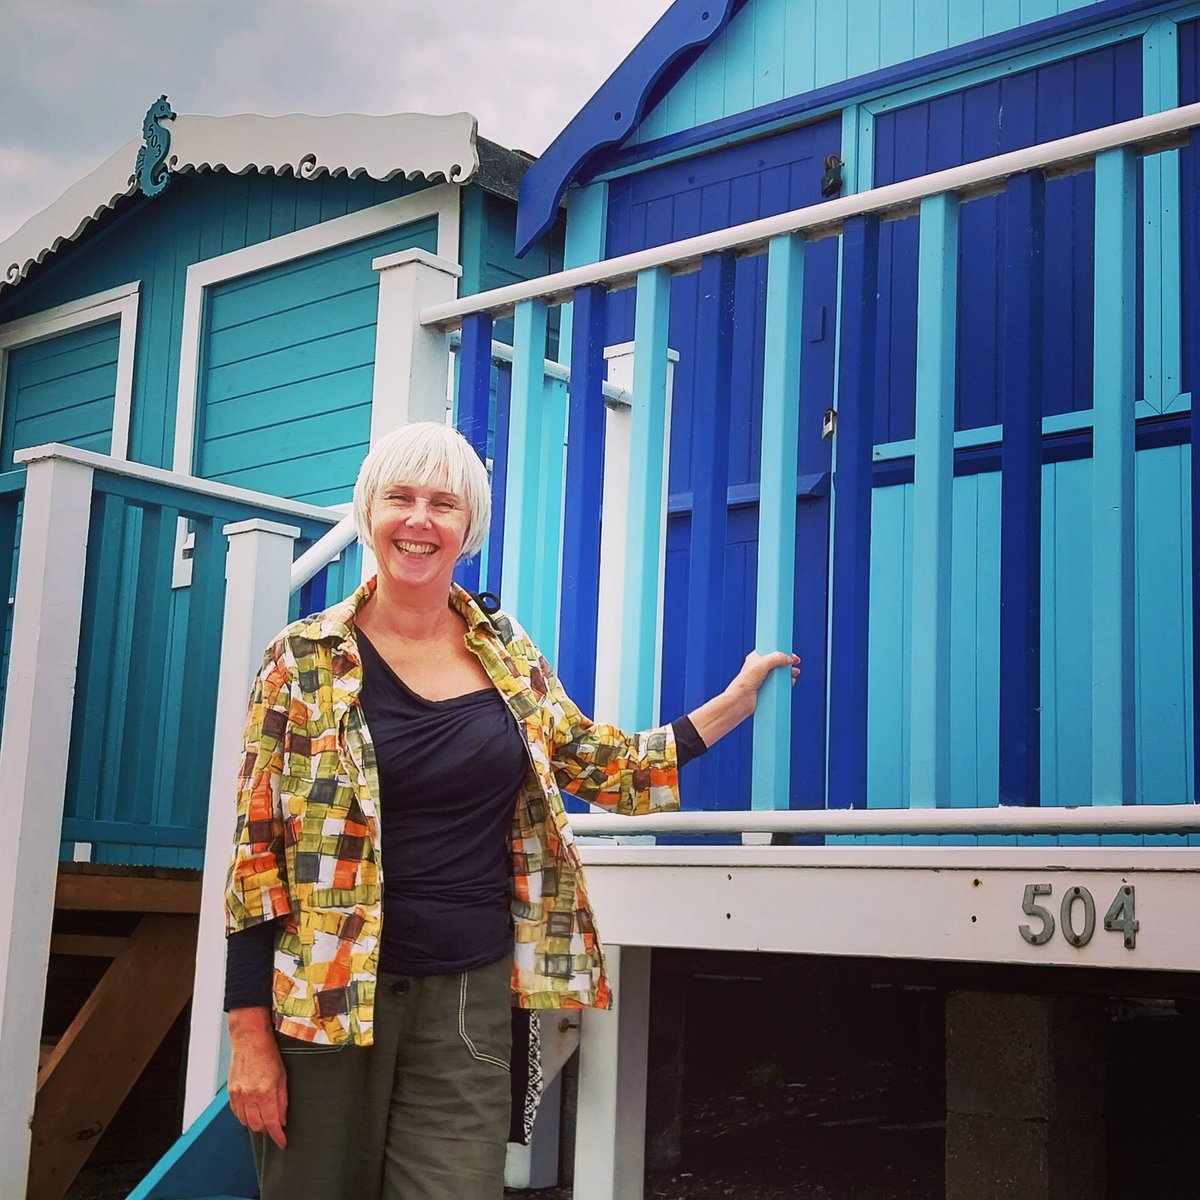 There's thousands of #BeachHuts along the #EssexCoast. Nancy Stevenson has written a book about those who spend time in these brightly coloured huts and tells Owen all about it on the latest episode of Essex By The Sea. Listen podfollow.com/essexbythesea